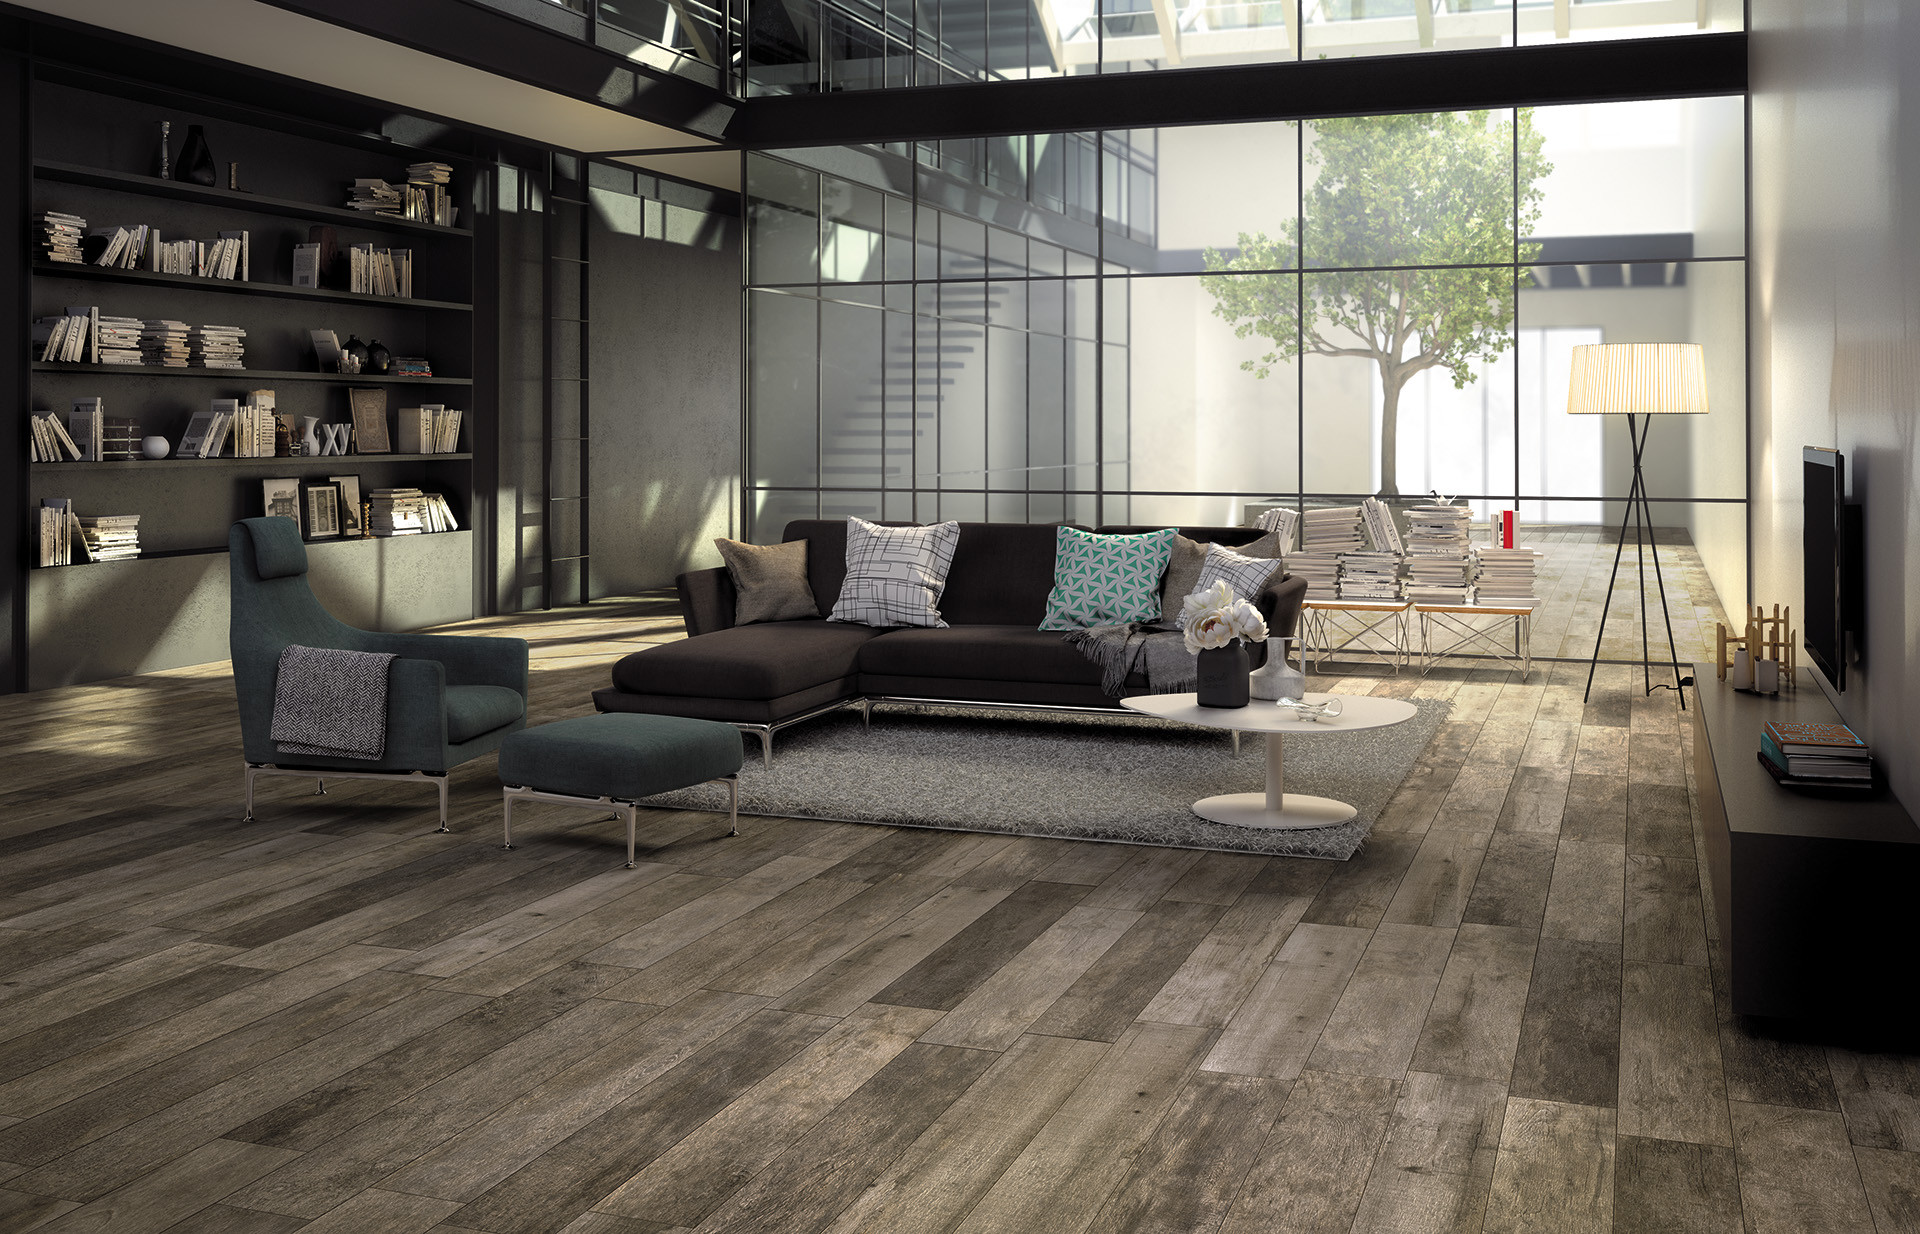 22 Ideal Yd Hardwood Floors Usa Inc 2022 free download yd hardwood floors usa inc of noon noon ceramic wood effect tiles by mirage mirage intended for mirage noon living nn02